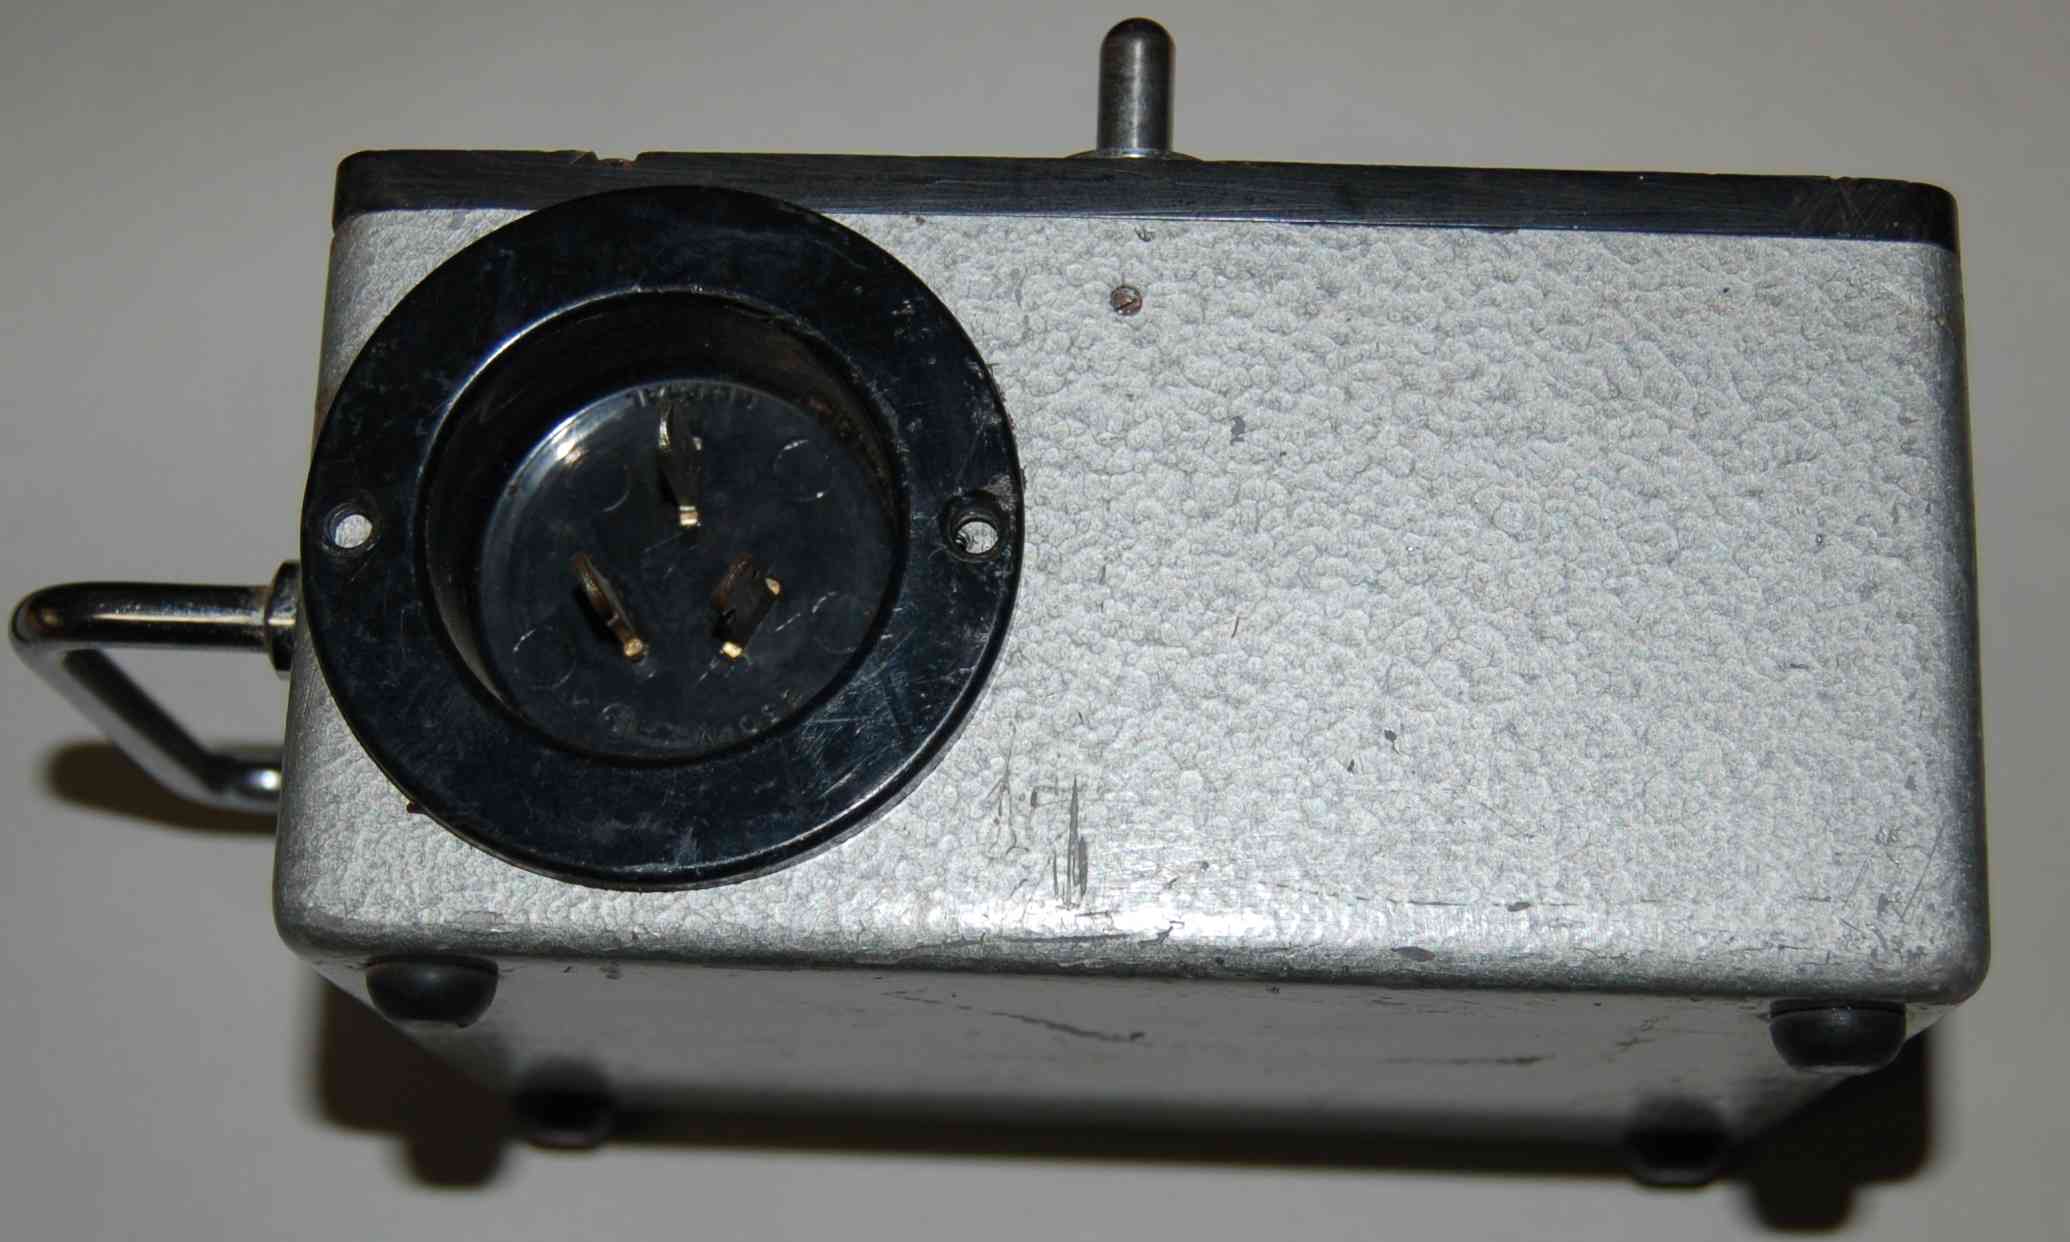  BE-2 Power connection